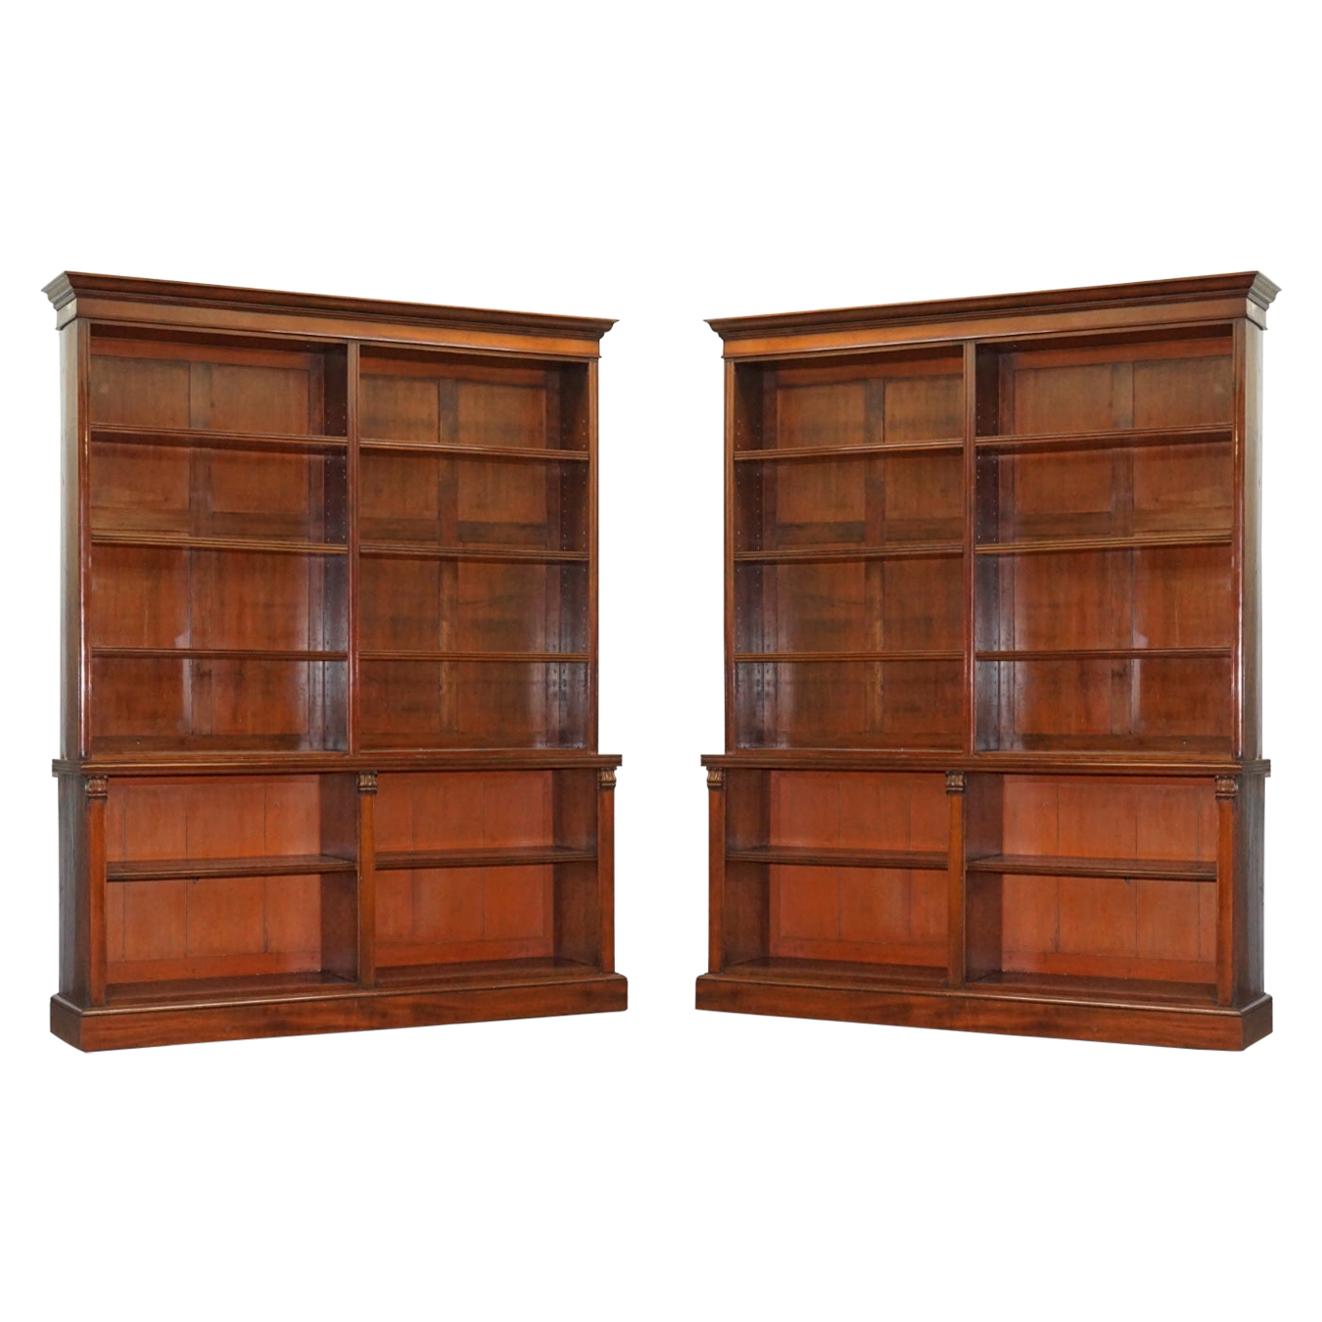 Exquisite Pair of Large Mid Victorian 1860 Antique Hardwood Library Bookcases